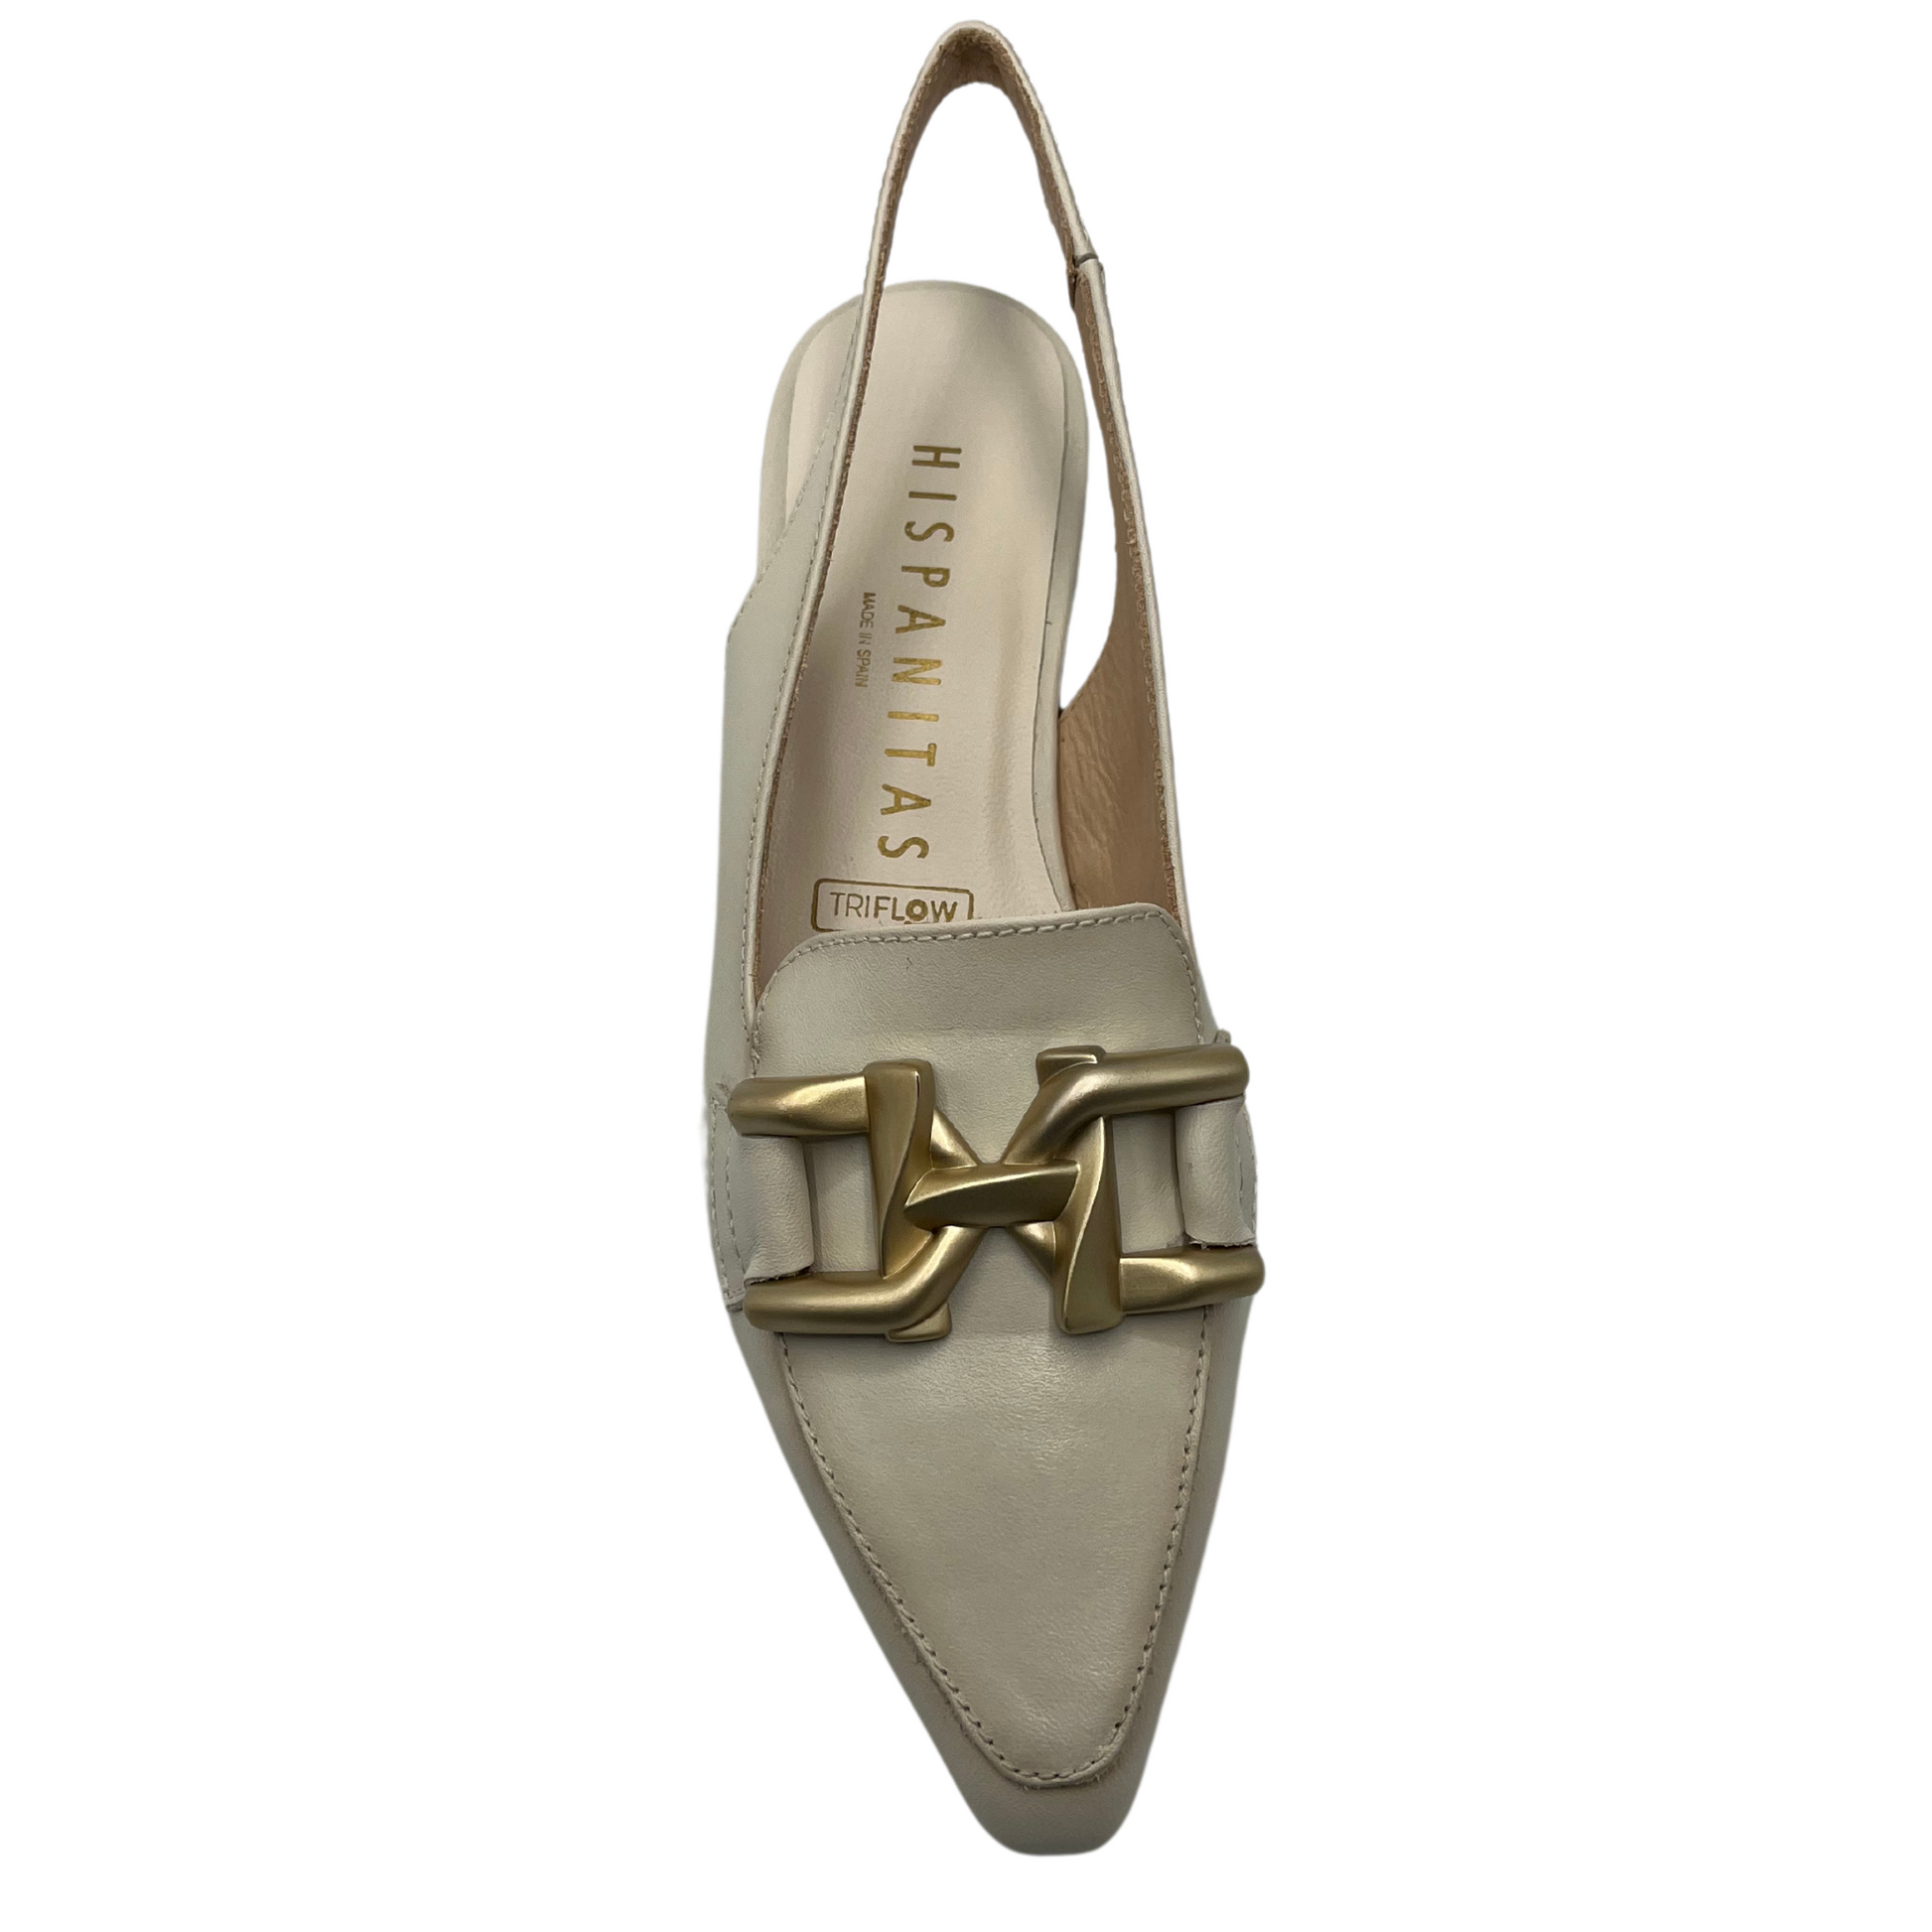 Top view of leather pump slingback with pointed toe and gold brooch detail on upper